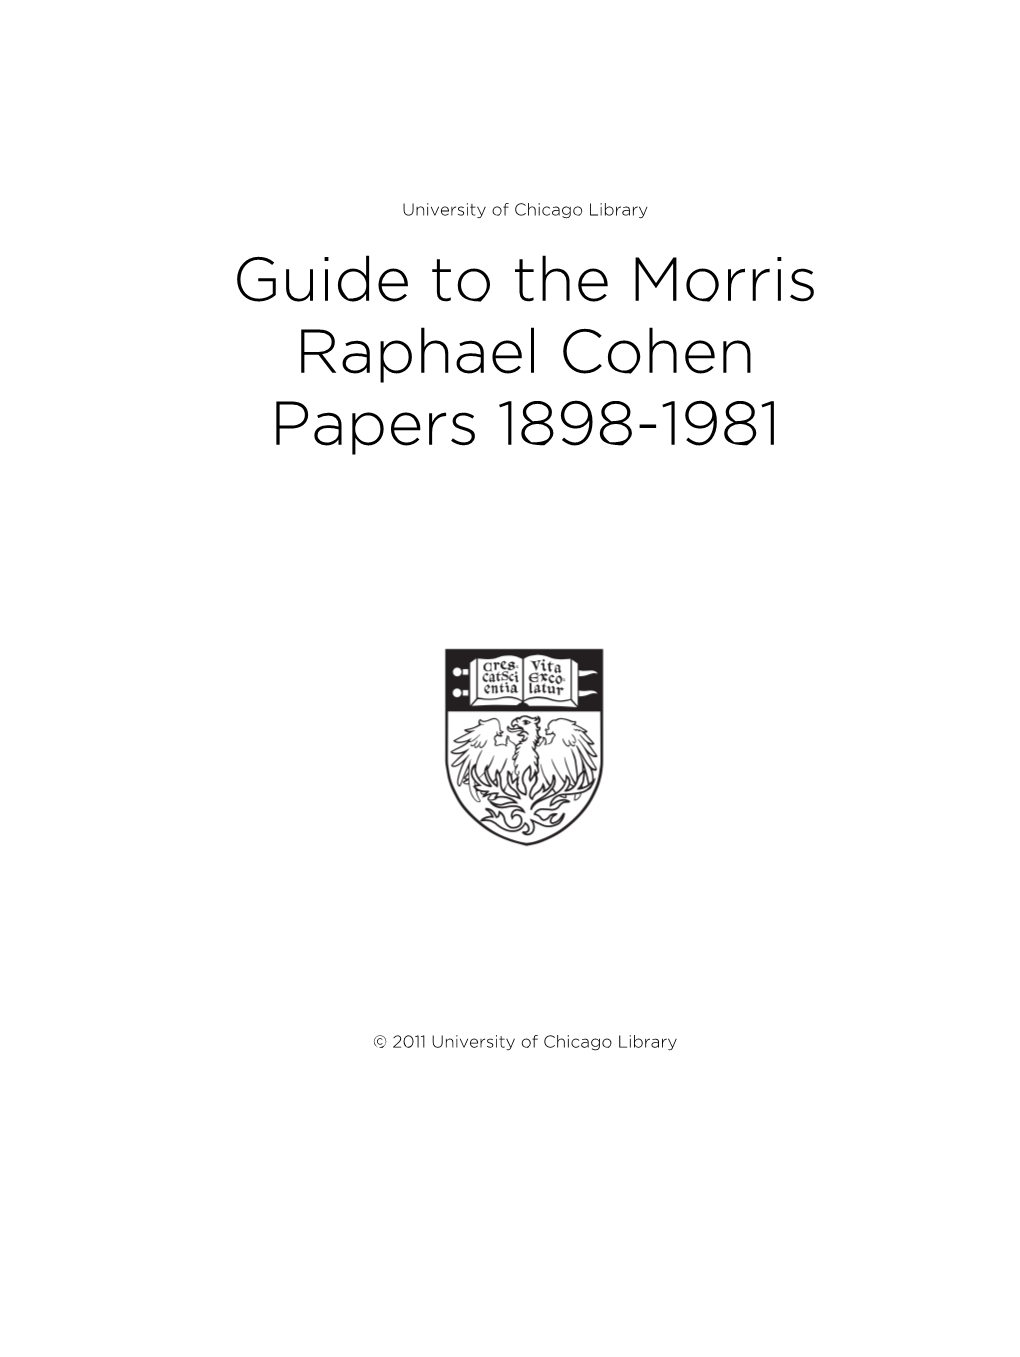 Guide to the Morris Raphael Cohen Papers 1898-1981